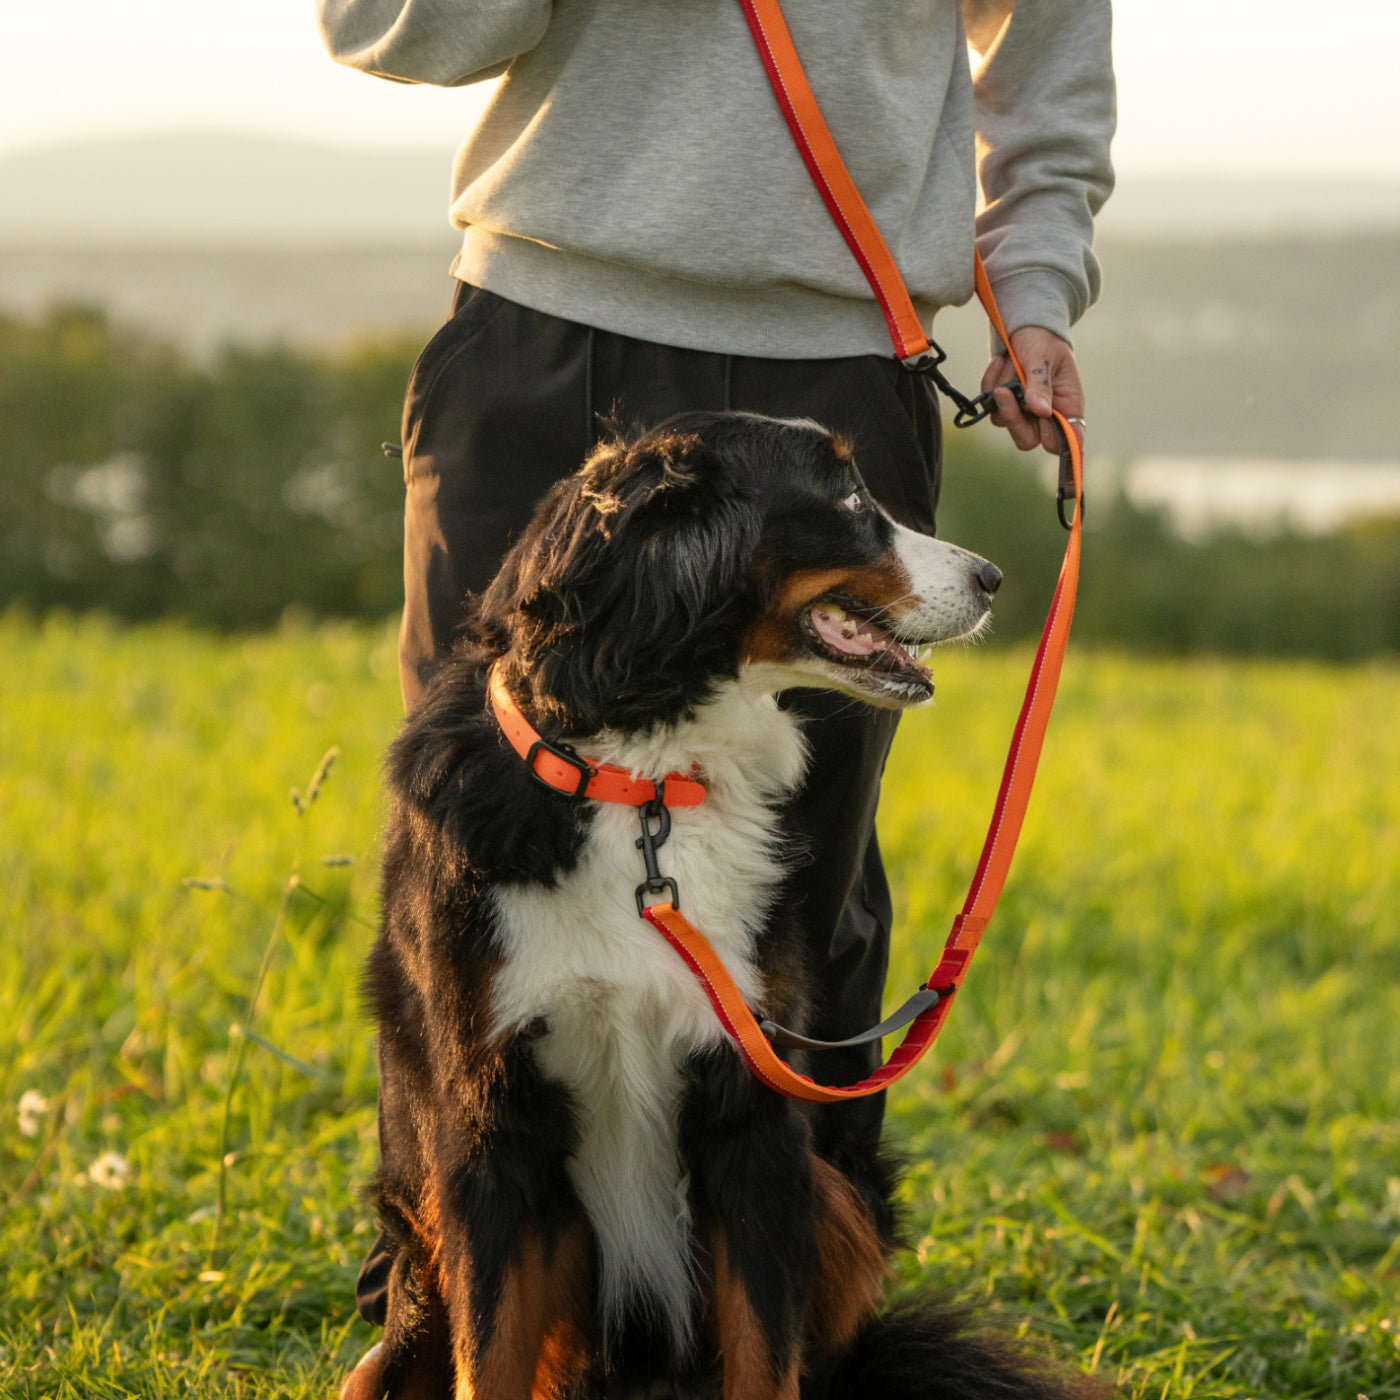 Medium dog tied with an easily adjustable multifunctional orange Nuvuq leash worn on the shoulder